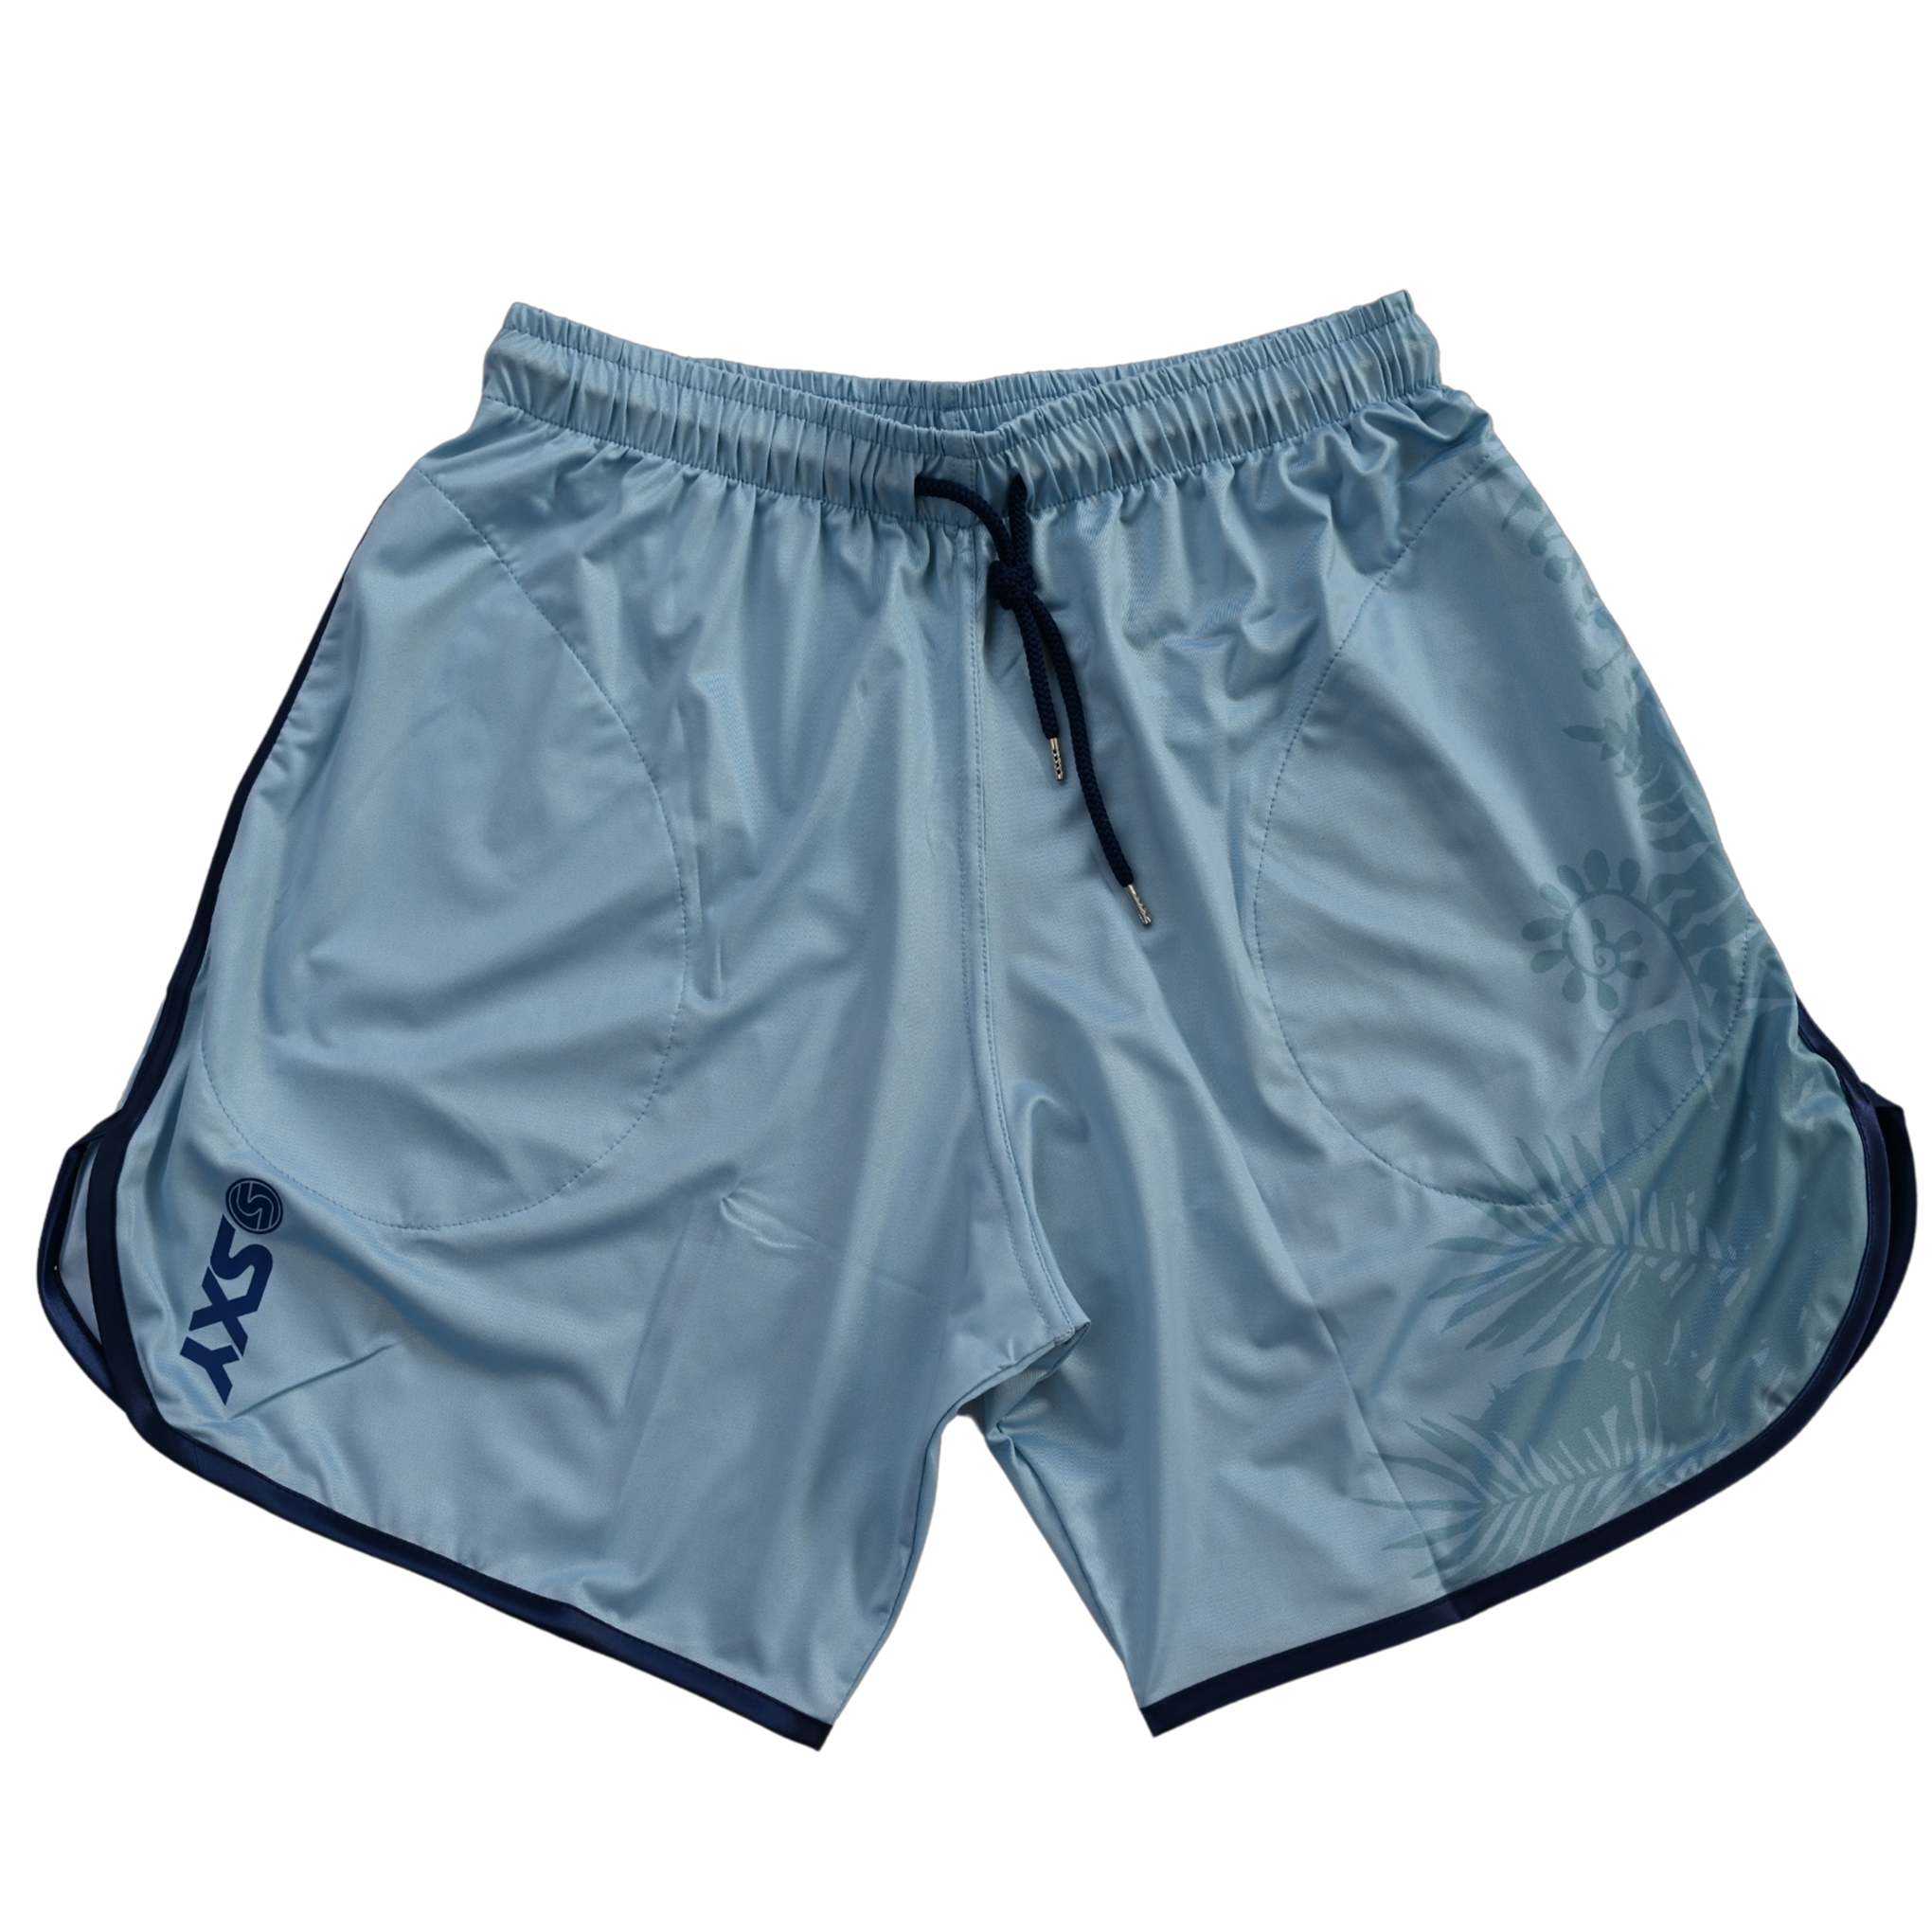 SEXY BRAND Men's SXY NKD Competition Short in Blue Bliss